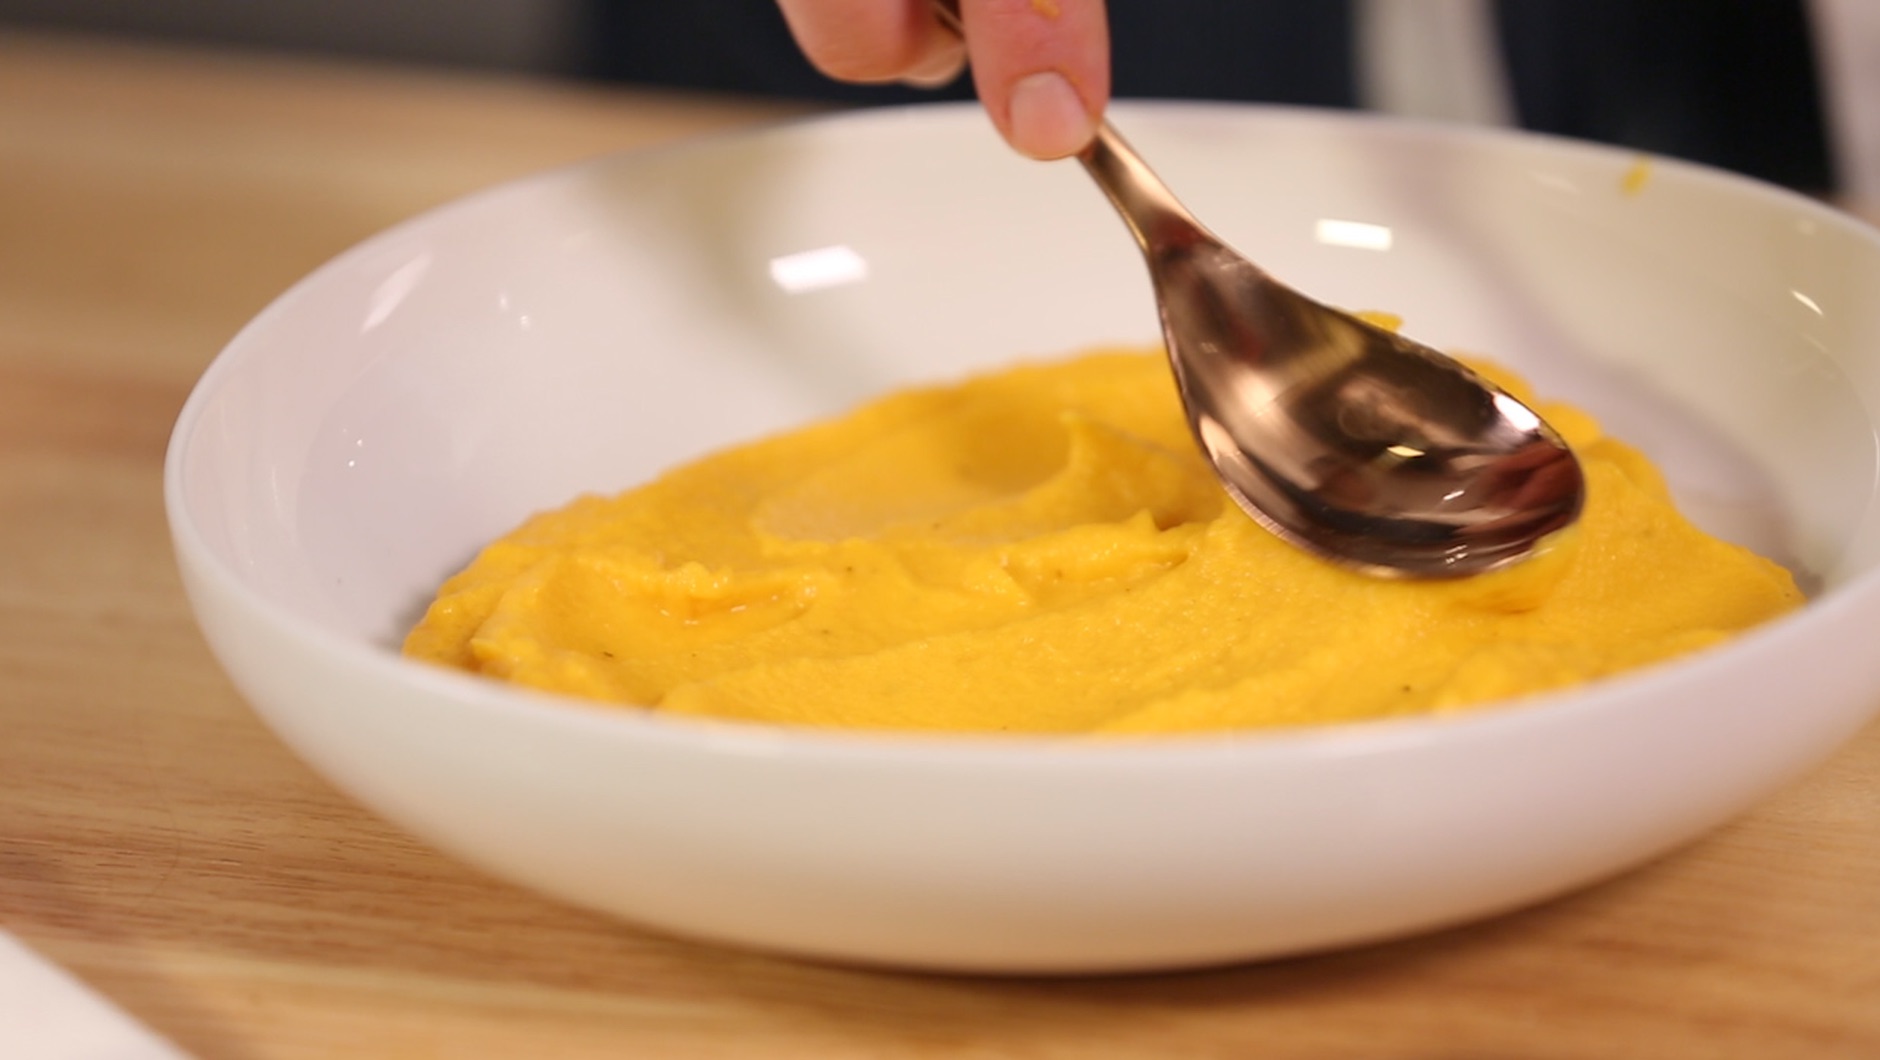 How to Make a Vegetable Puree